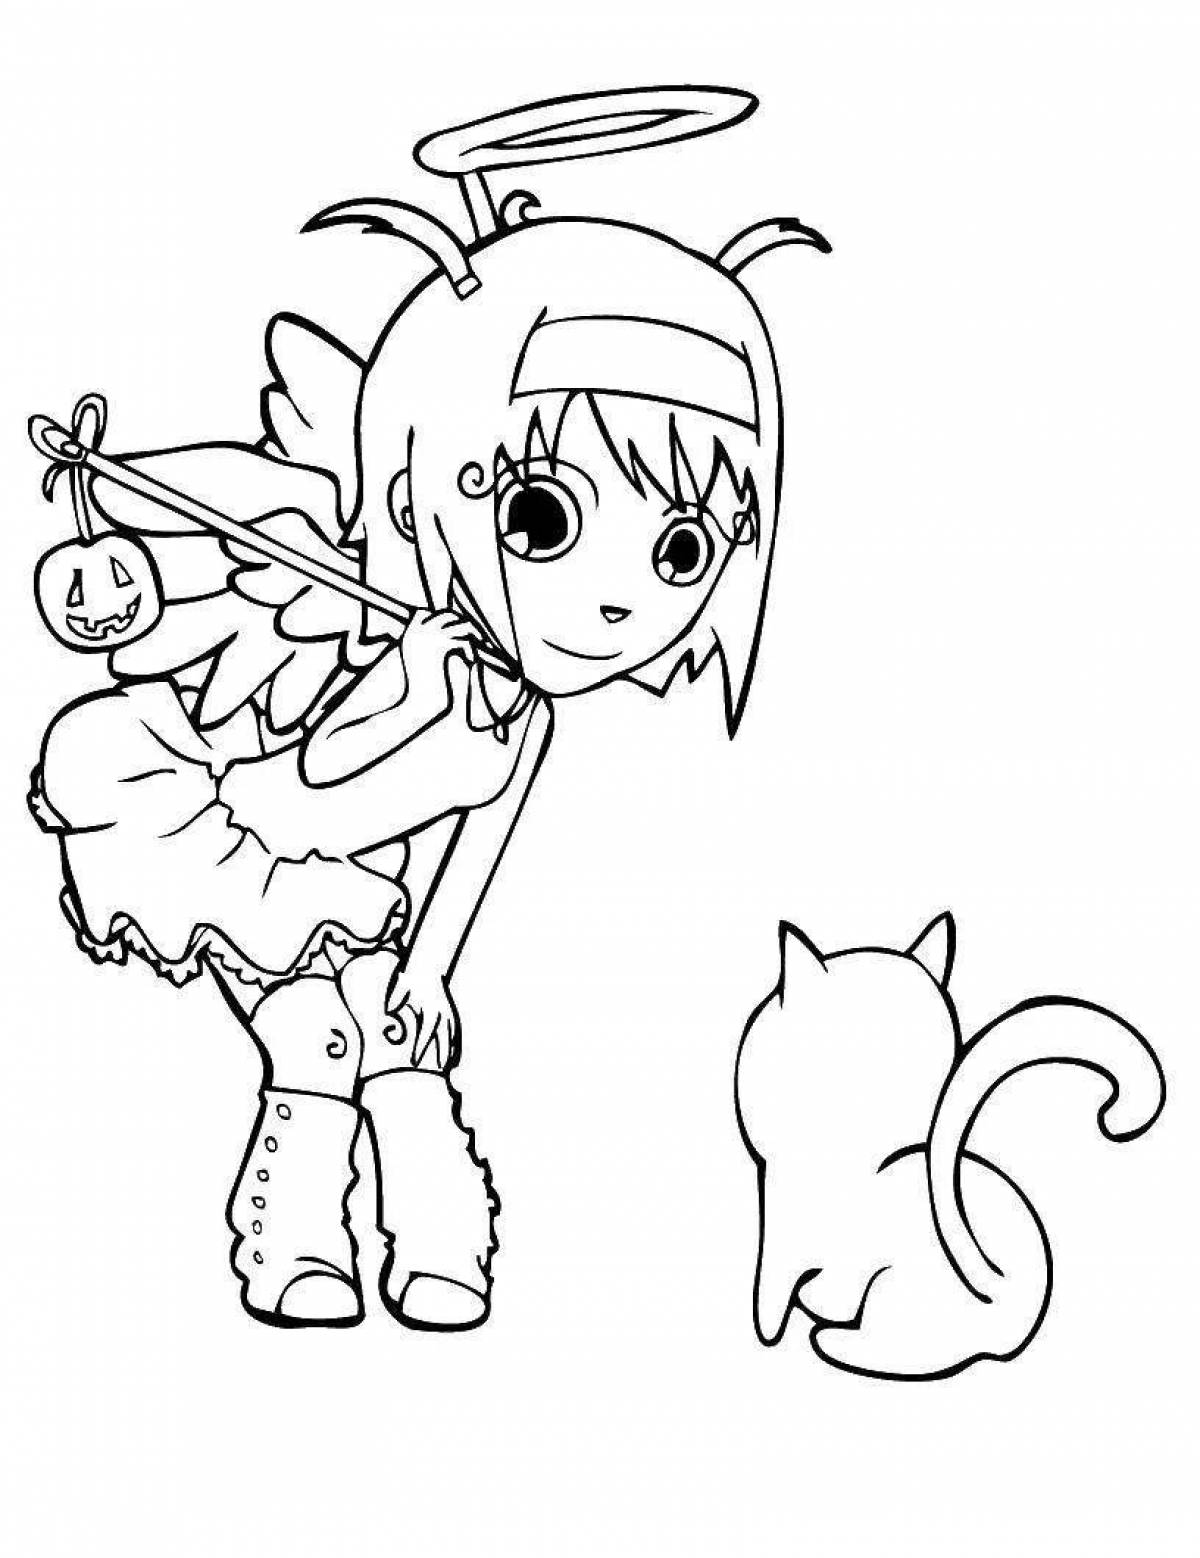 Coloring book shining angel cat